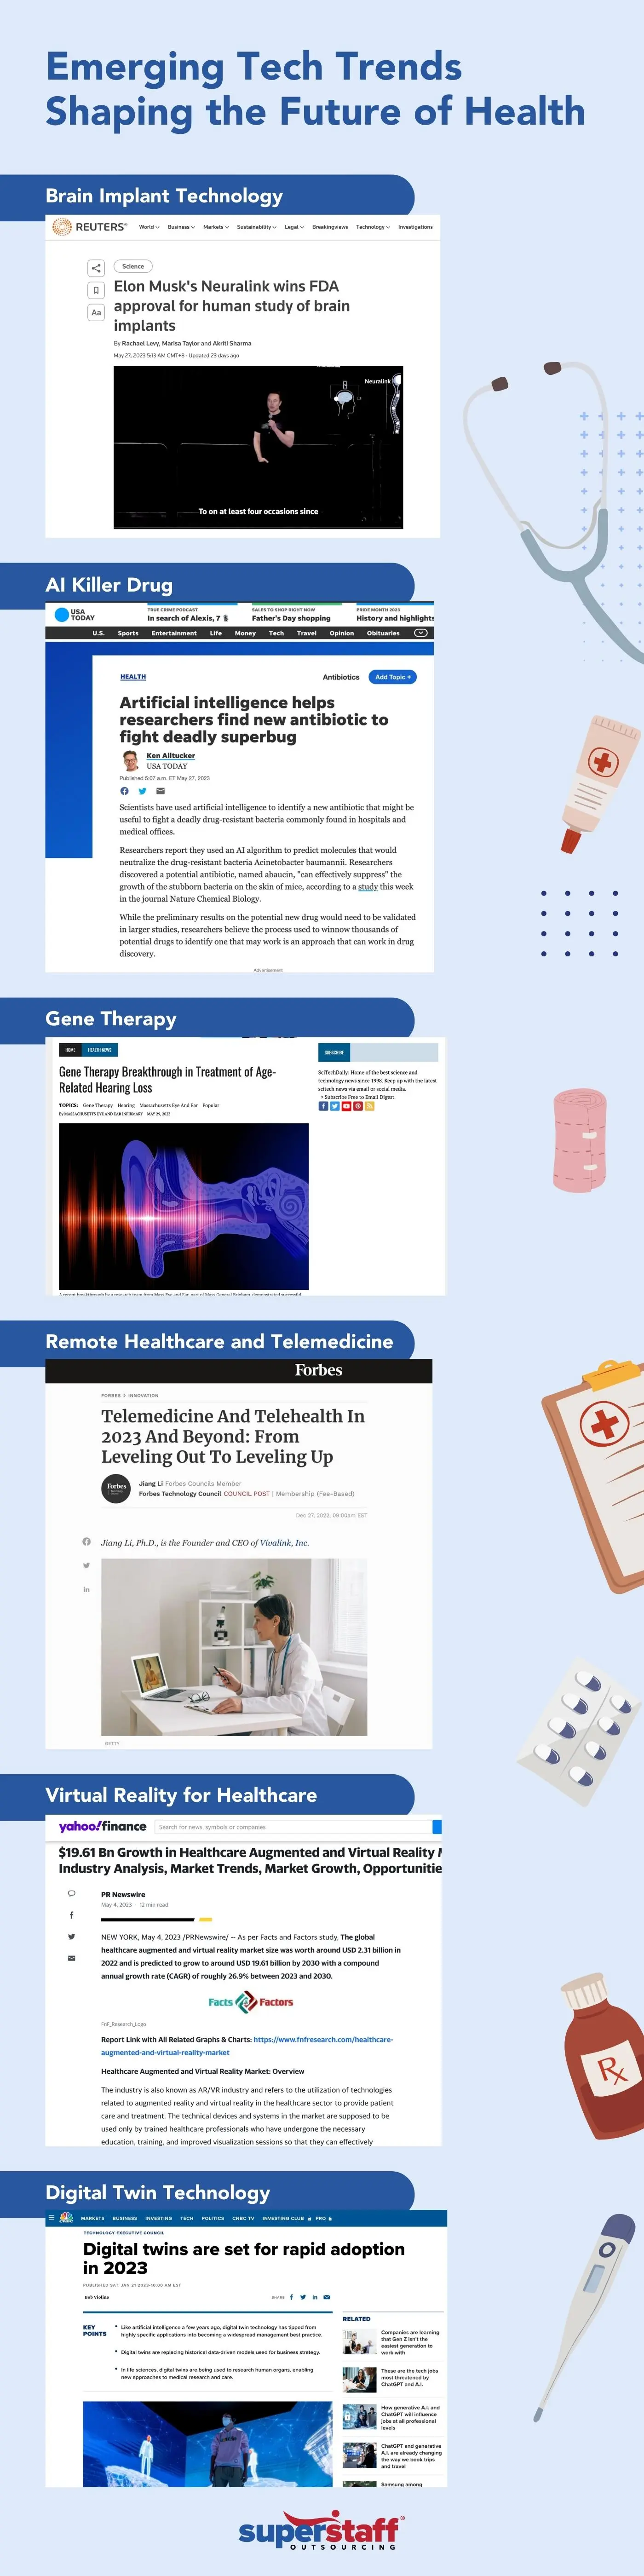 A collage of news headlines showing the most compelling Healthcare Tech Trends.